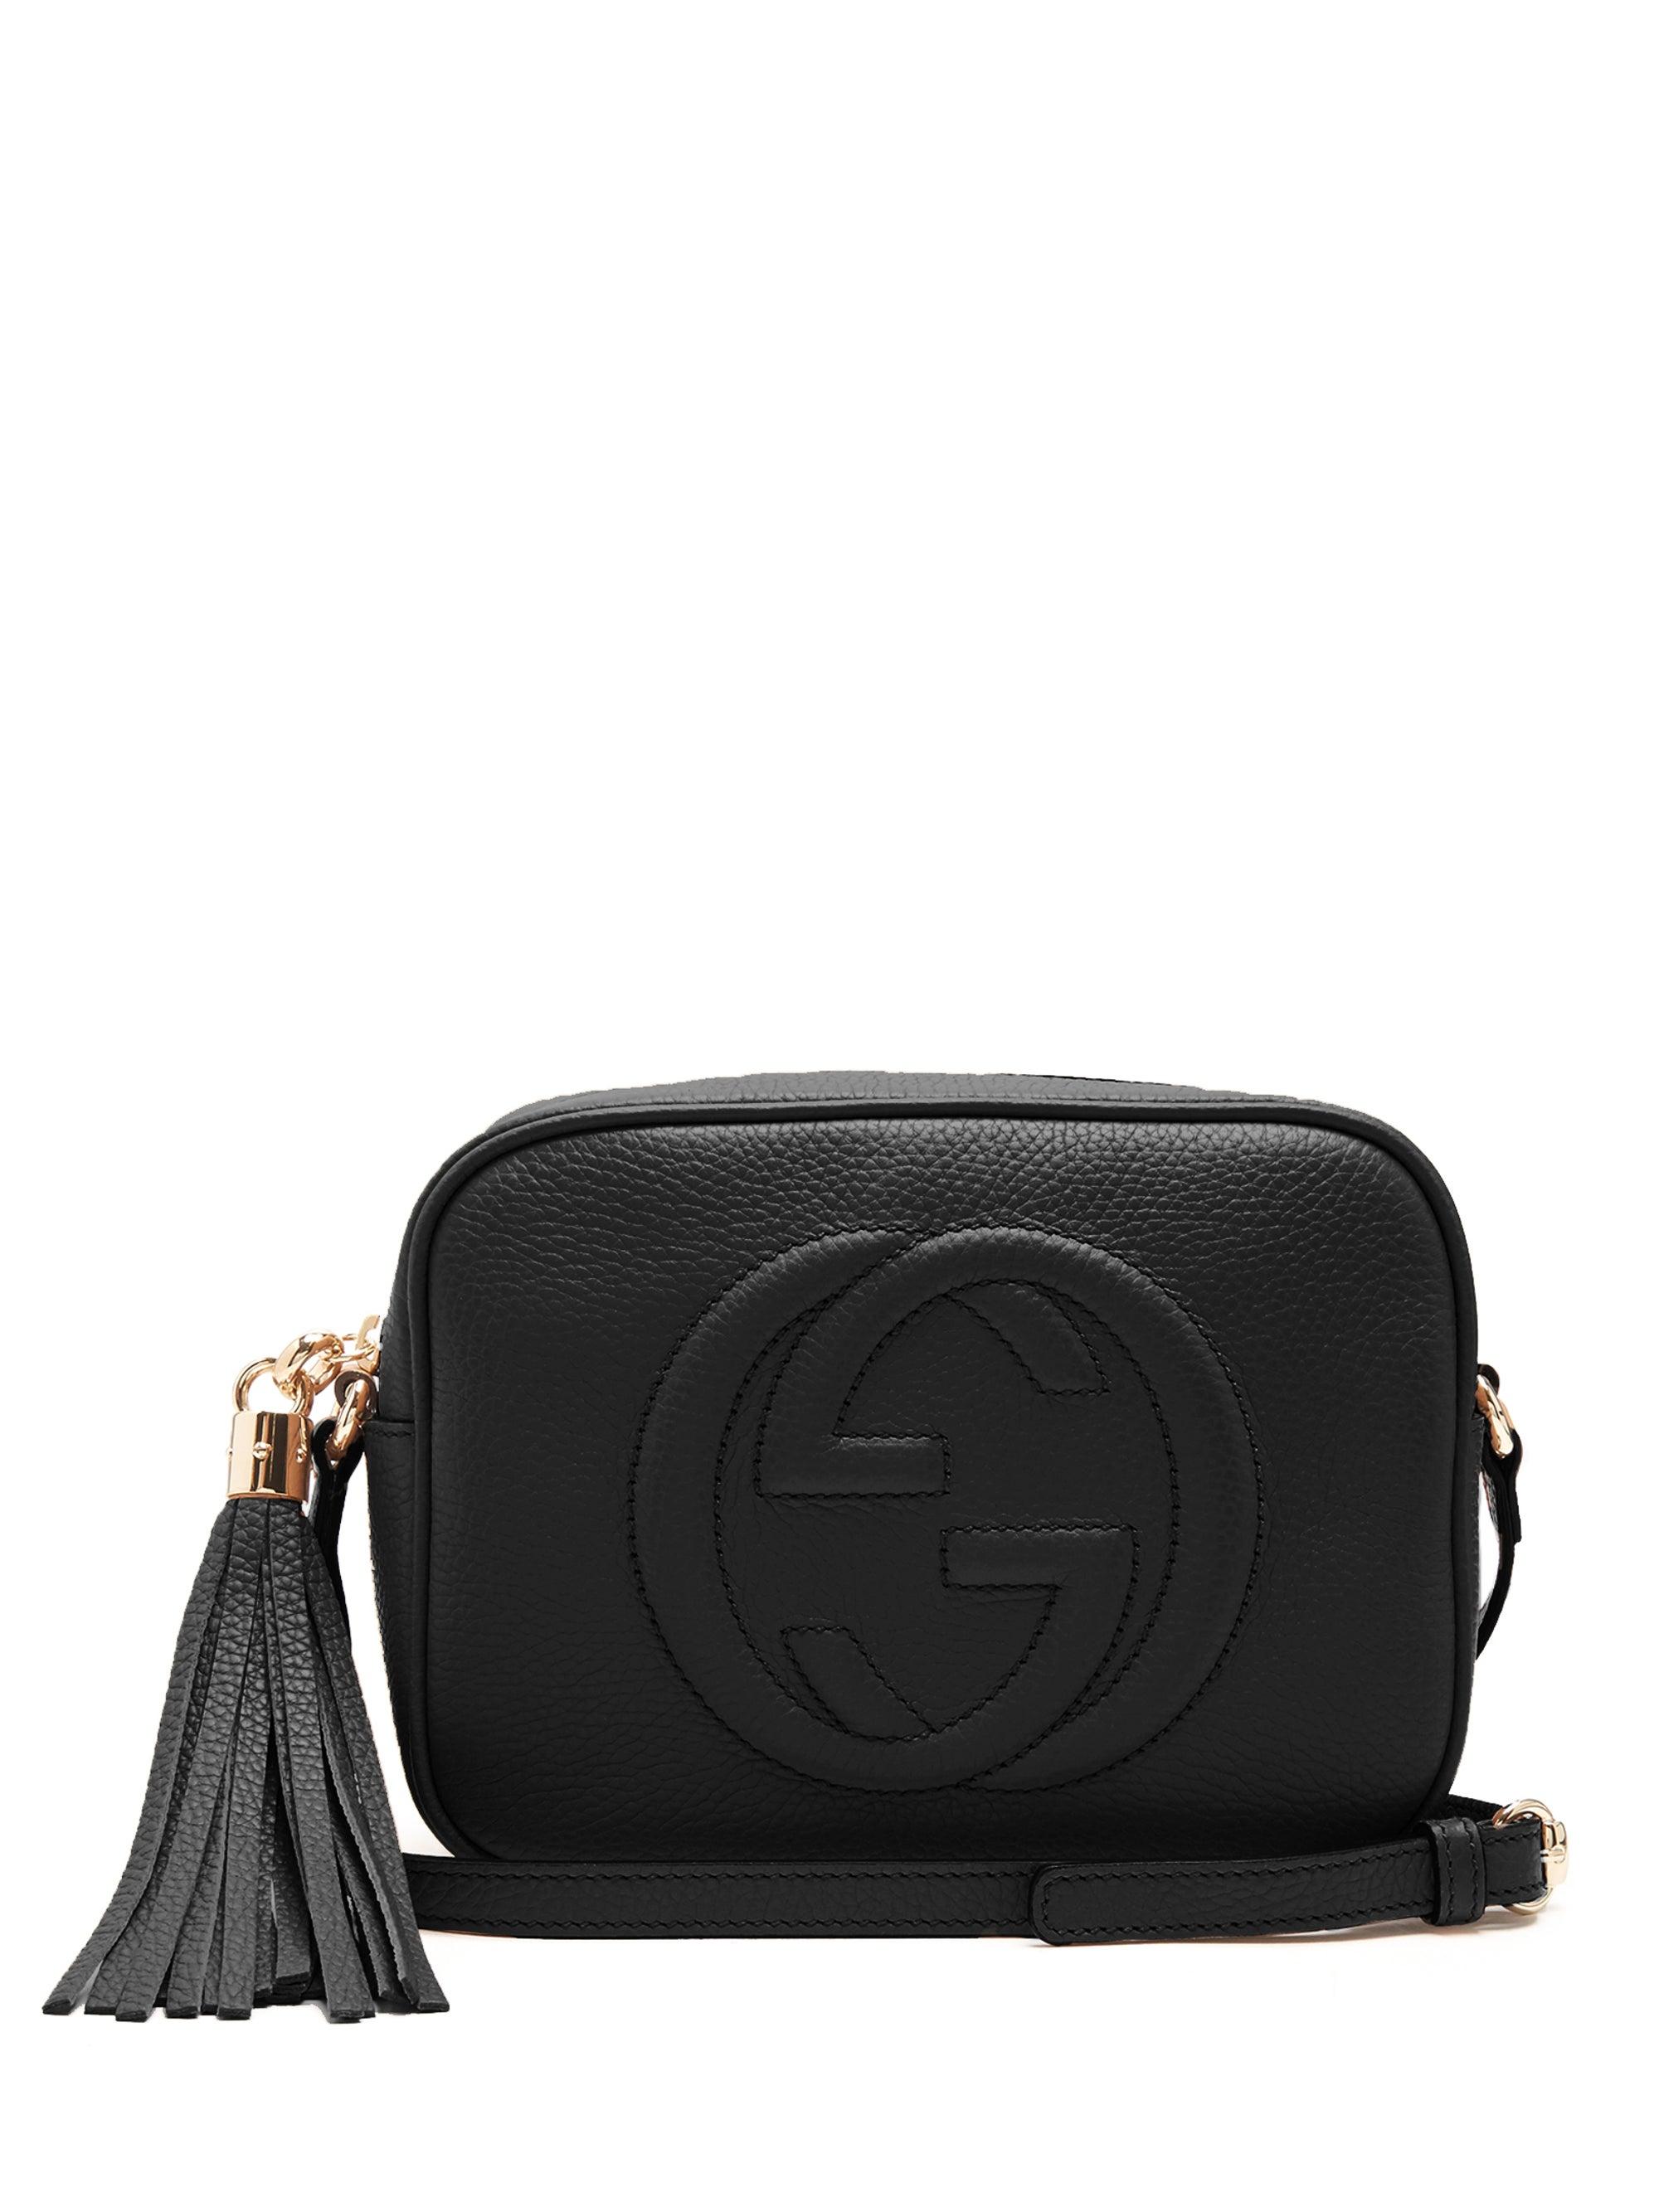 Gucci Small Soho Leather Crossbody Bag in Black - Save 44% | Lyst Canada